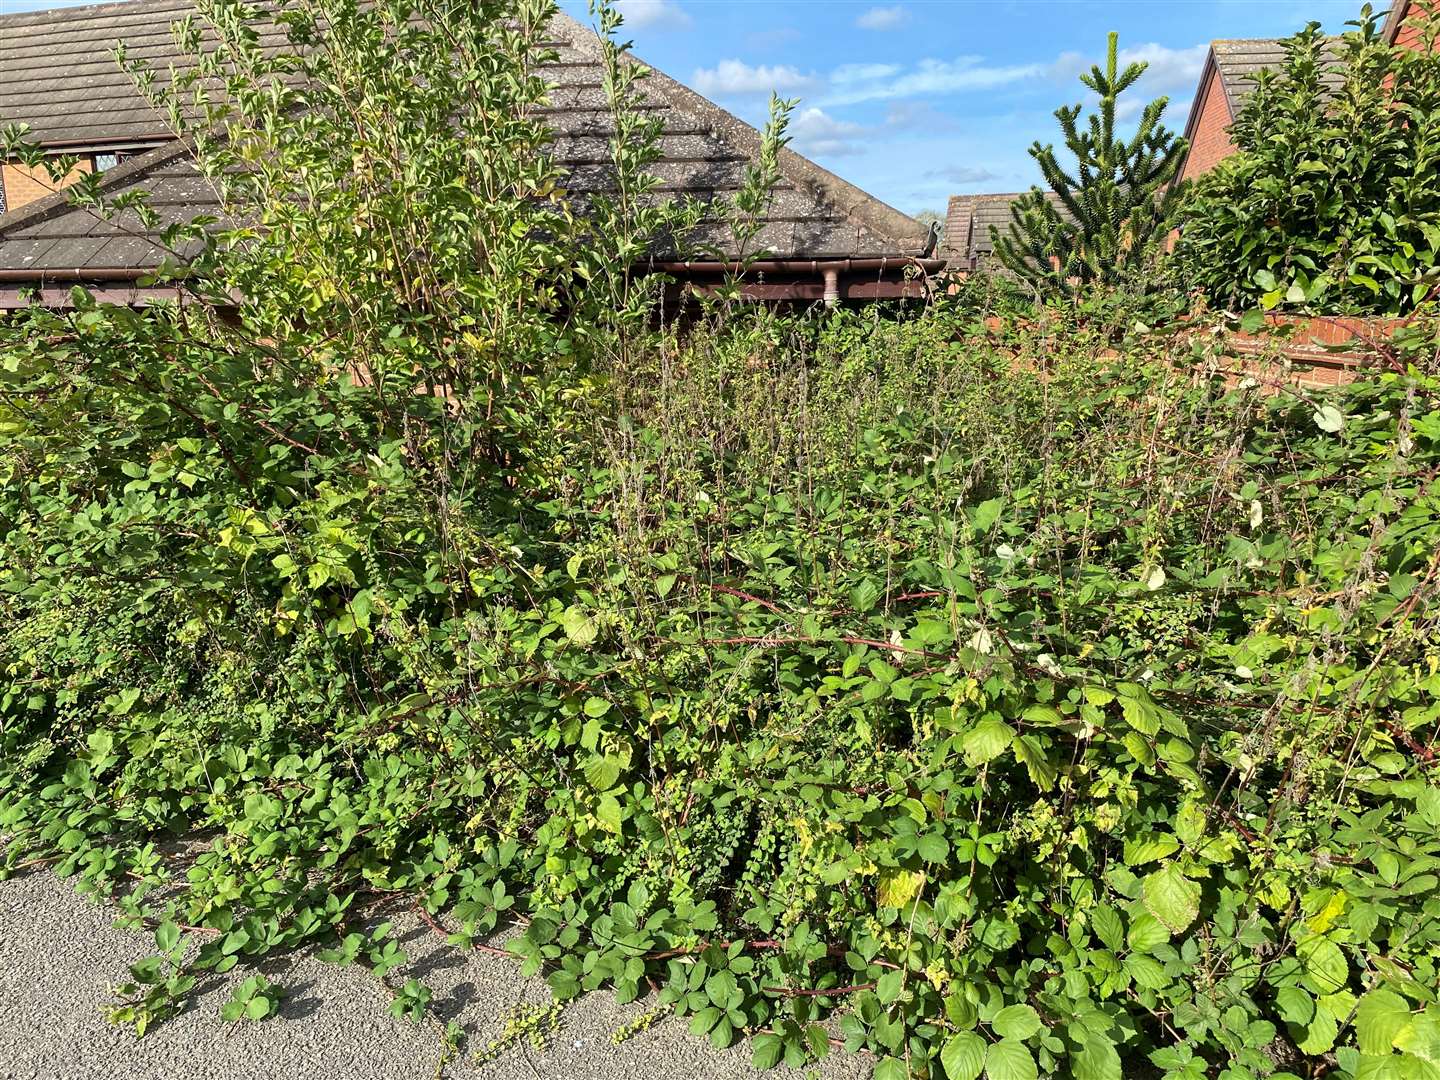 The brambles along Chaucer Way are "thick and dangerous"